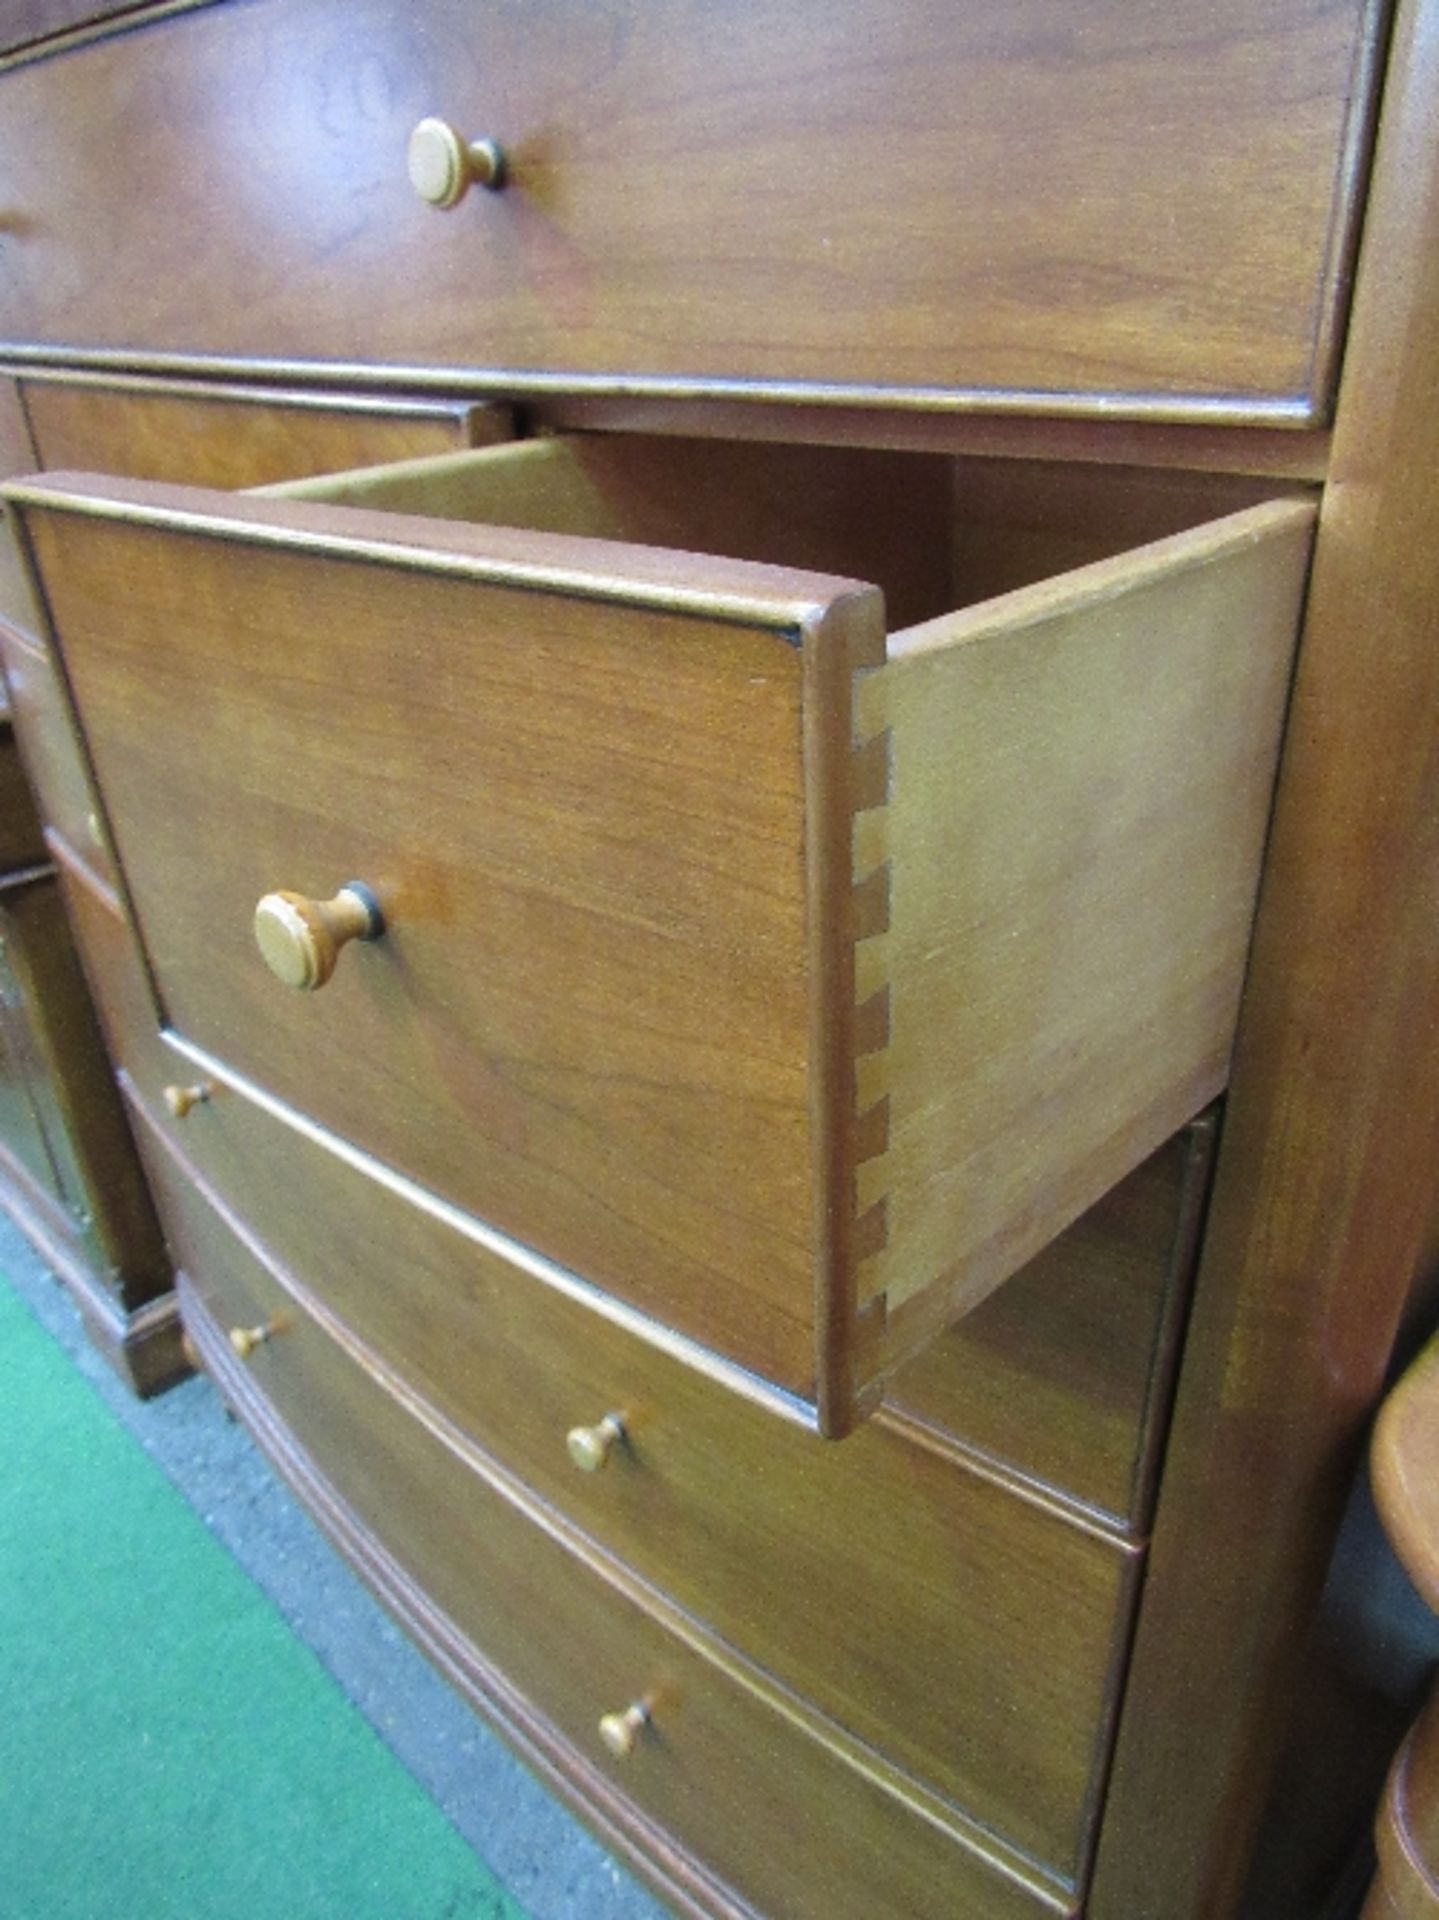 Cherry wood bow front chest of 7 graduated drawers by Willis & Gambier, 120cms x 54cms x 116cms. - Image 2 of 3